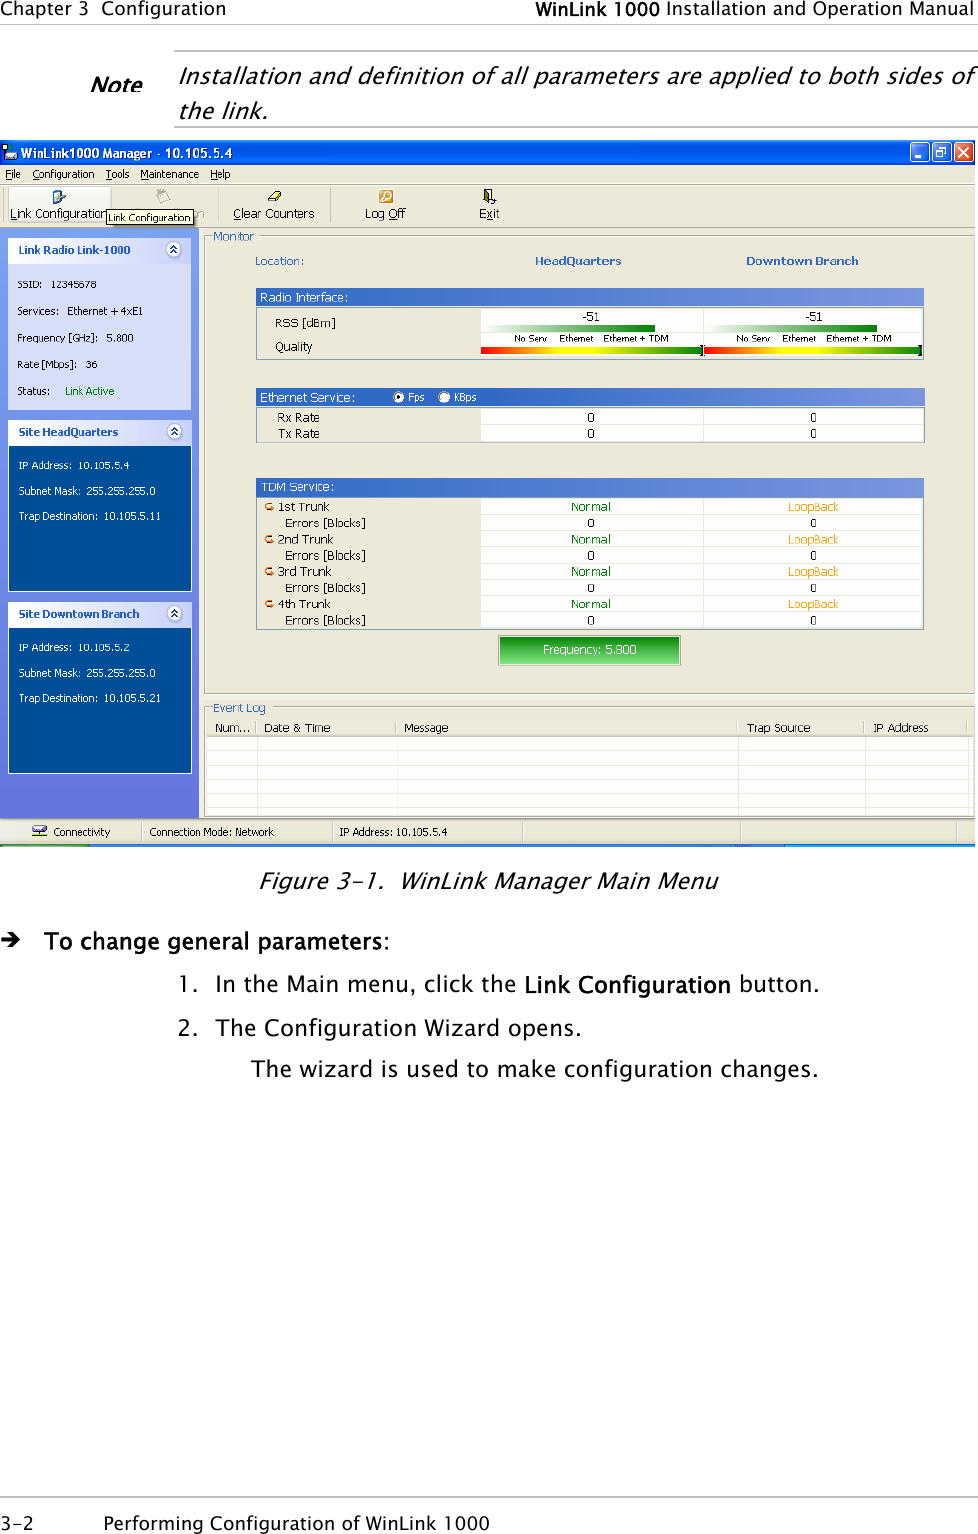 Chapter 3  Configuration  WinLink 1000 Installation and Operation Manual  Installation and definition of all parameters are applied to both sides of the link. Note  Figure 3-1.  WinLink Manager Main Menu Î To change general parameters: 1. In the Main menu, click the Link Configuration button. 2. The Configuration Wizard opens. The wizard is used to make configuration changes. 3-2  Performing Configuration of WinLink 1000  